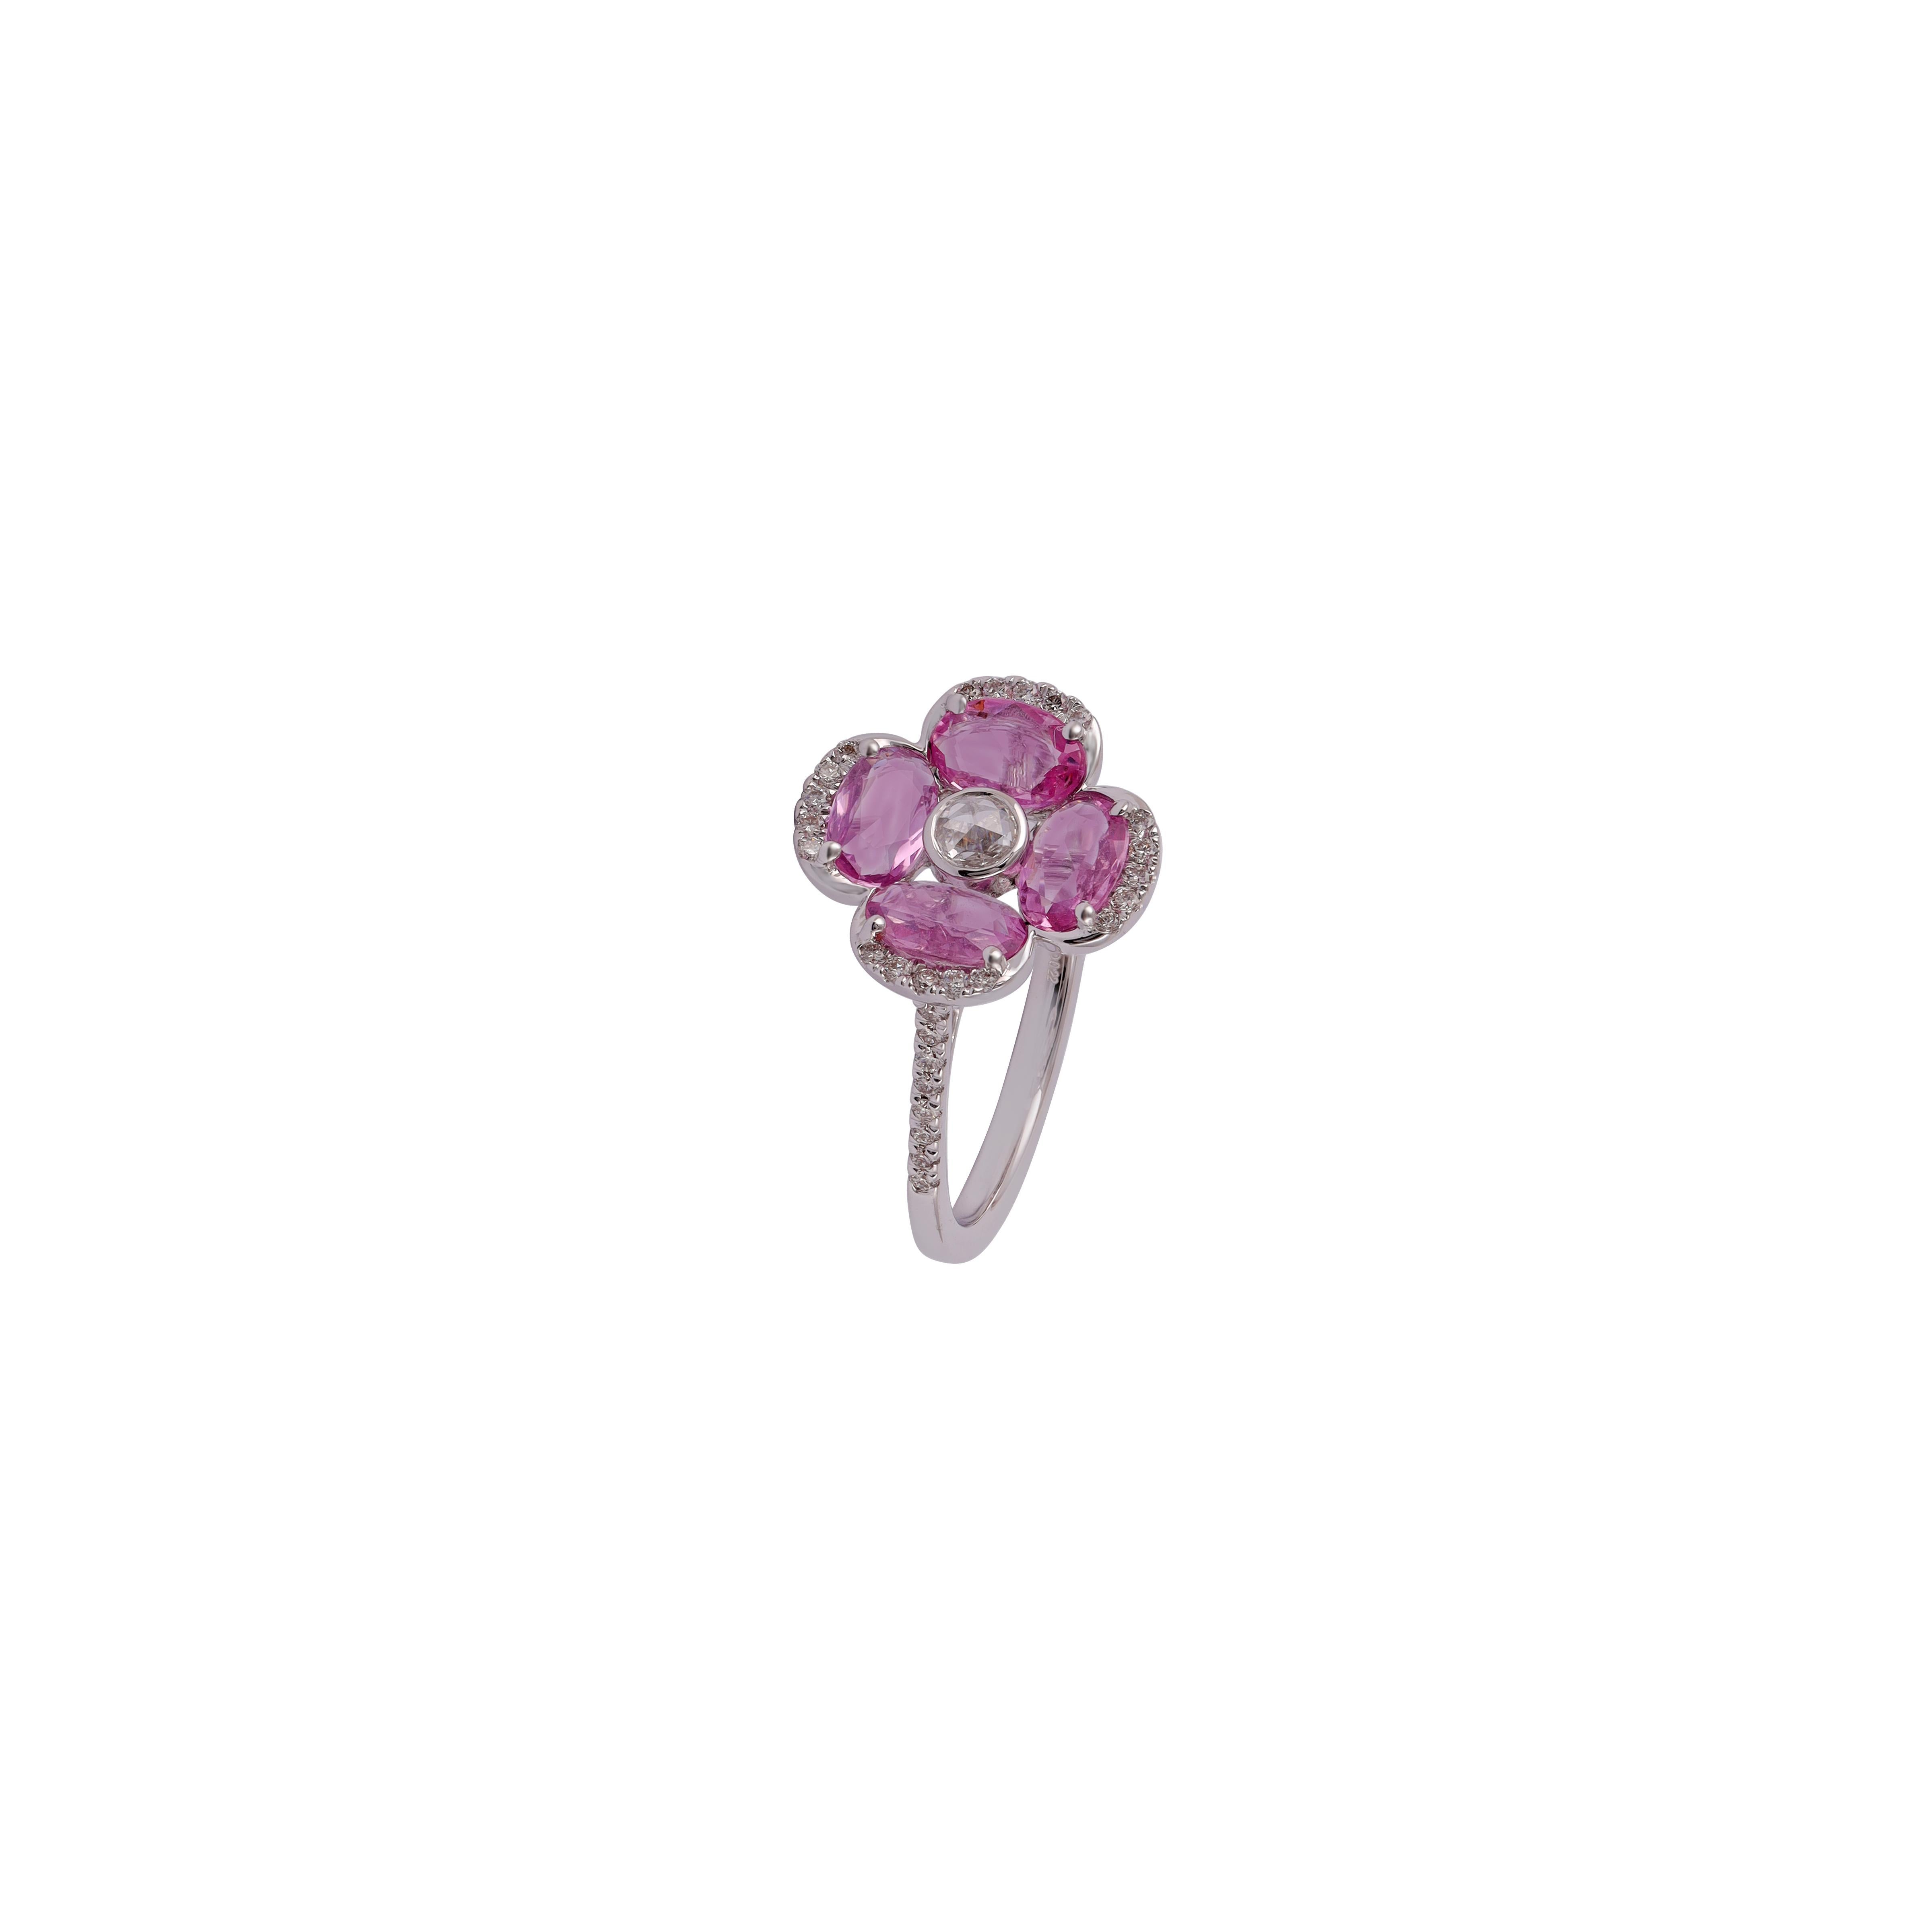 Contemporary Rose Cut Diamond Surrounded by Oval Pink Sapphire Flower Ring